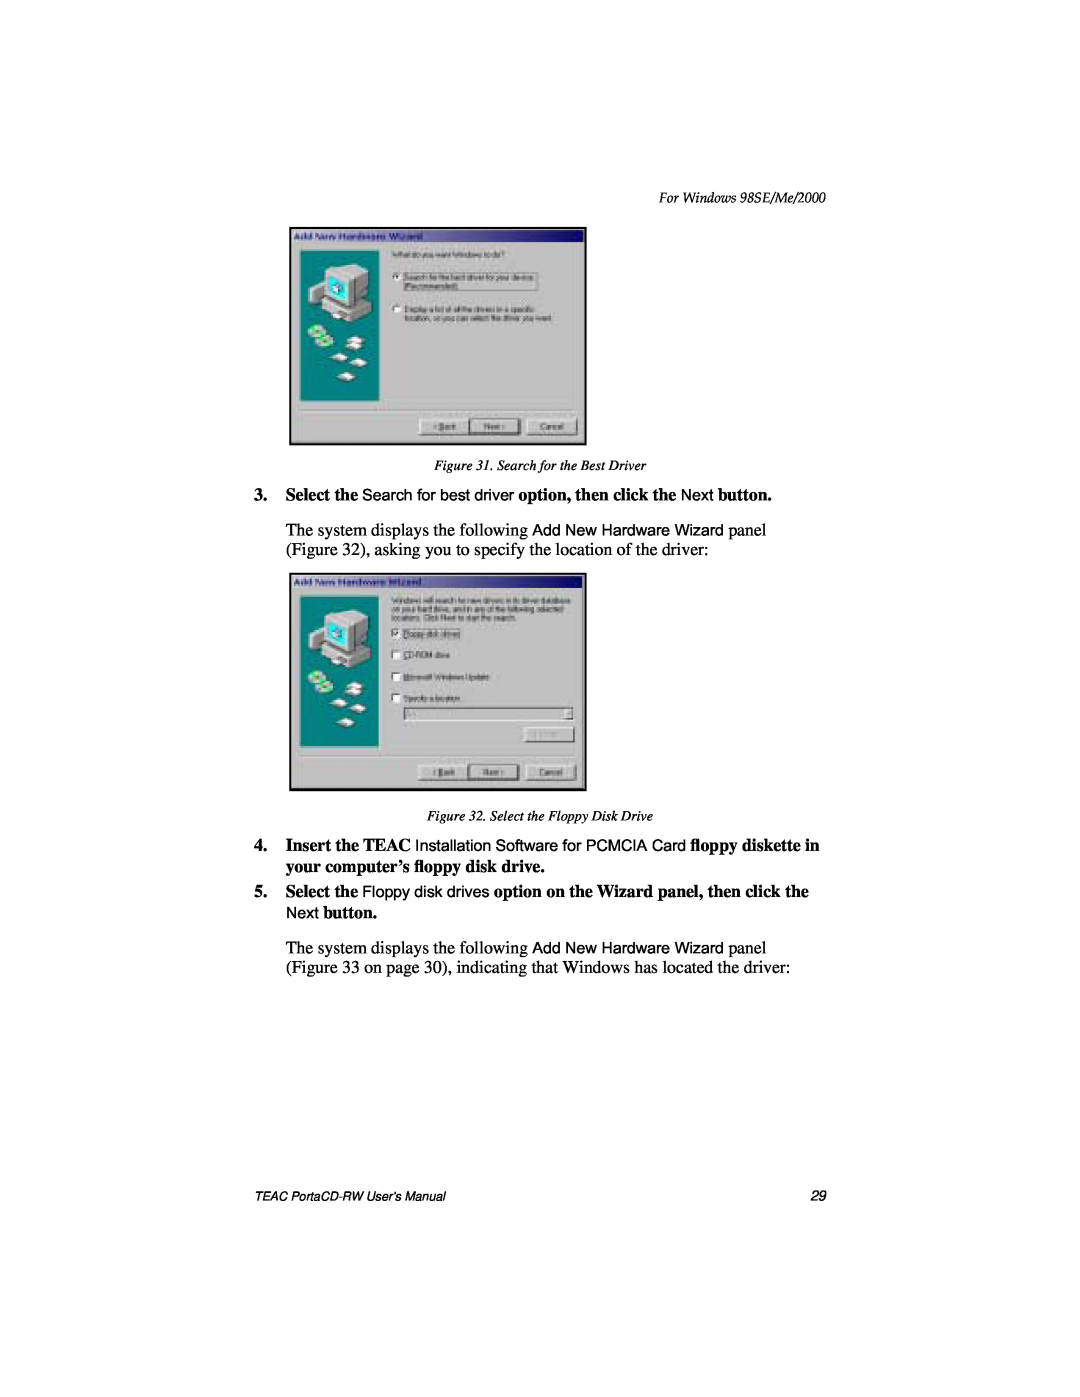 Teac E24E user manual For Windows 98SE/Me/2000, Search for the Best Driver, Select the Floppy Disk Drive 